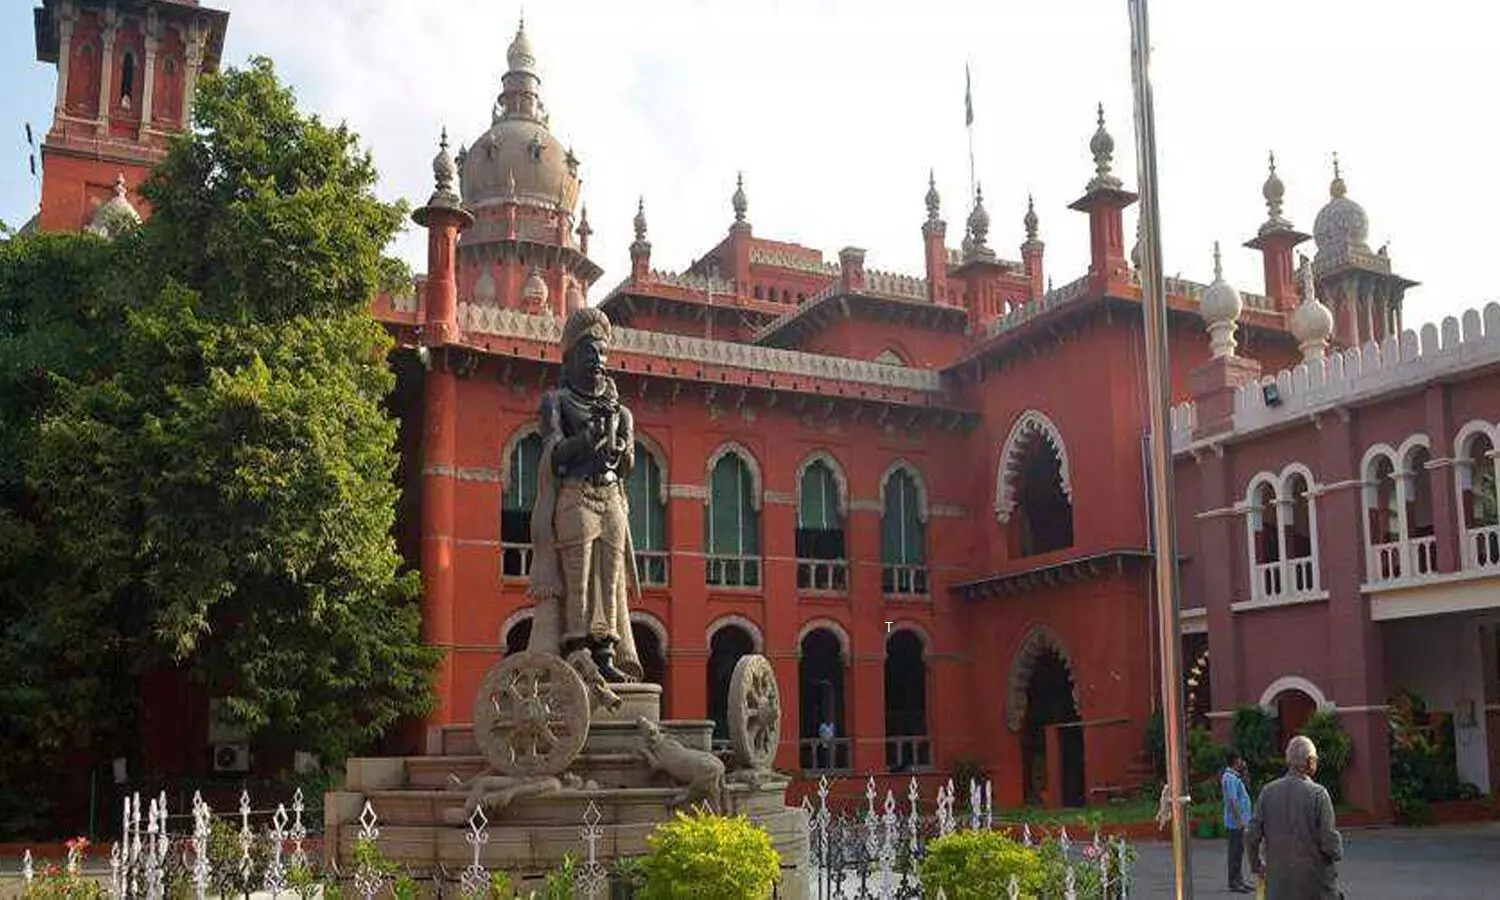 Provide 50 percent Reservation to In-Service Doctors in Super-Speciality Courses: Madras HC tells Govt